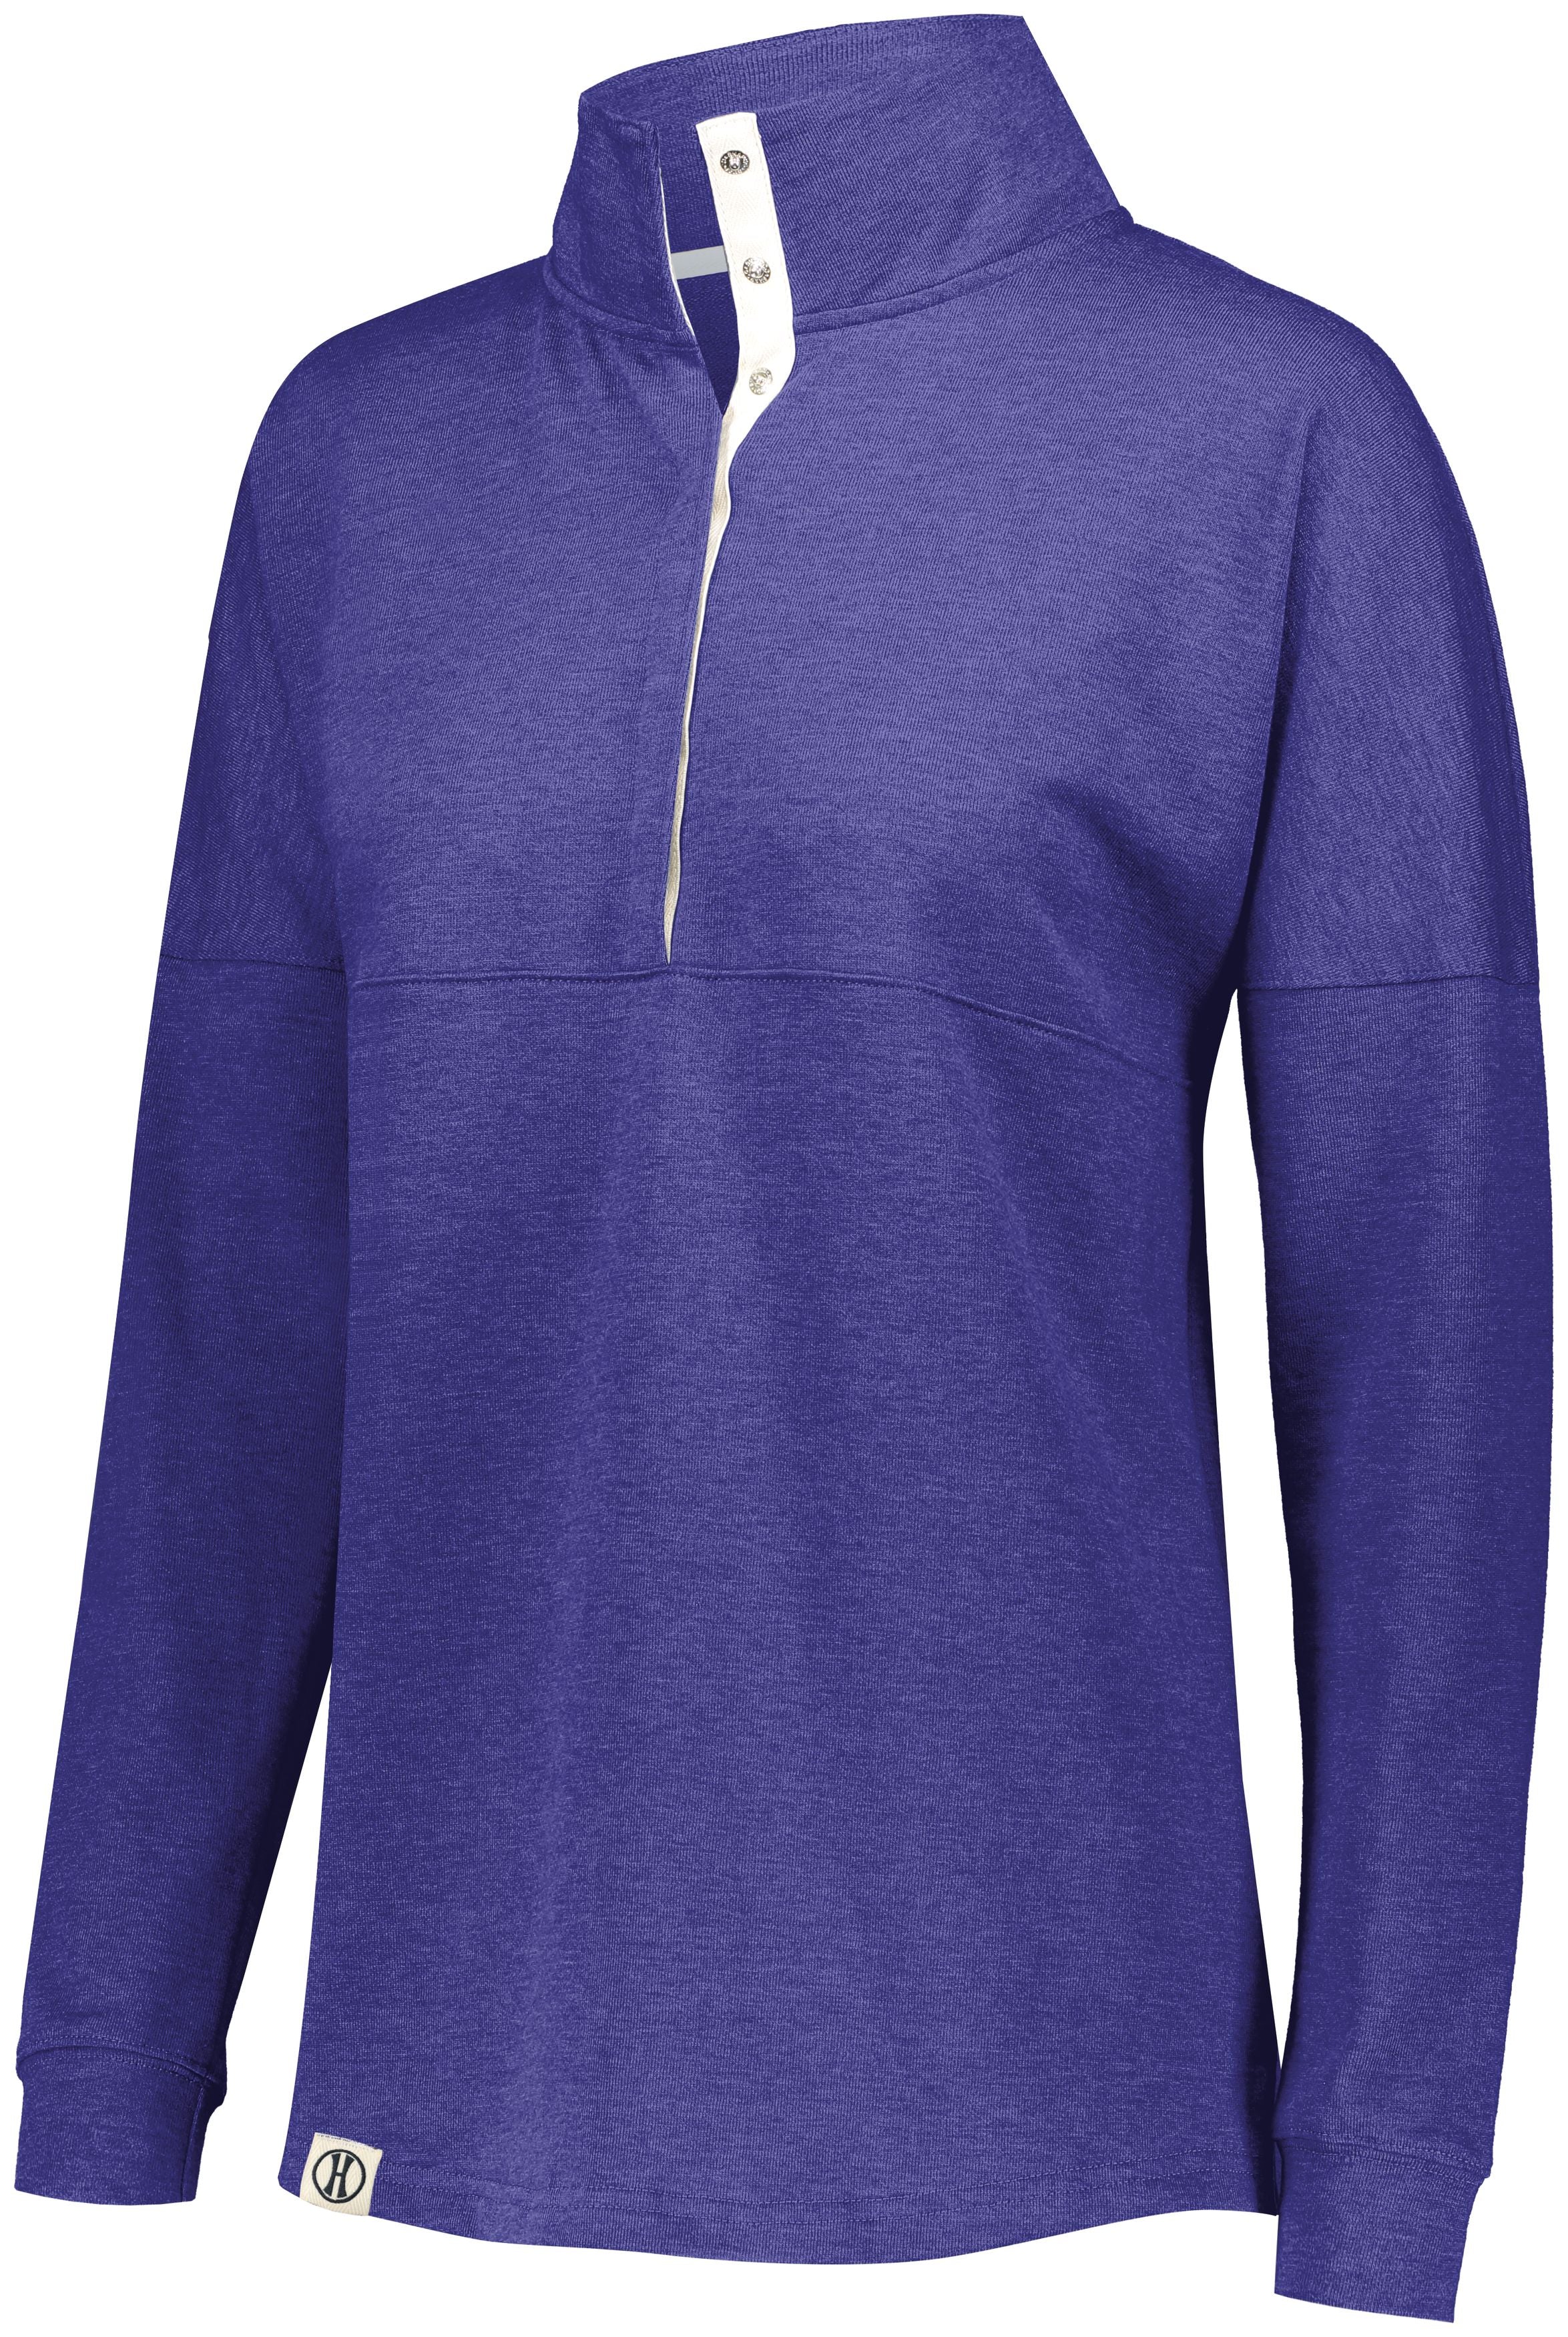 Holloway Ladies Sophomore Pullover in Purple Heather  -Part of the Ladies, Holloway, Shirts product lines at KanaleyCreations.com